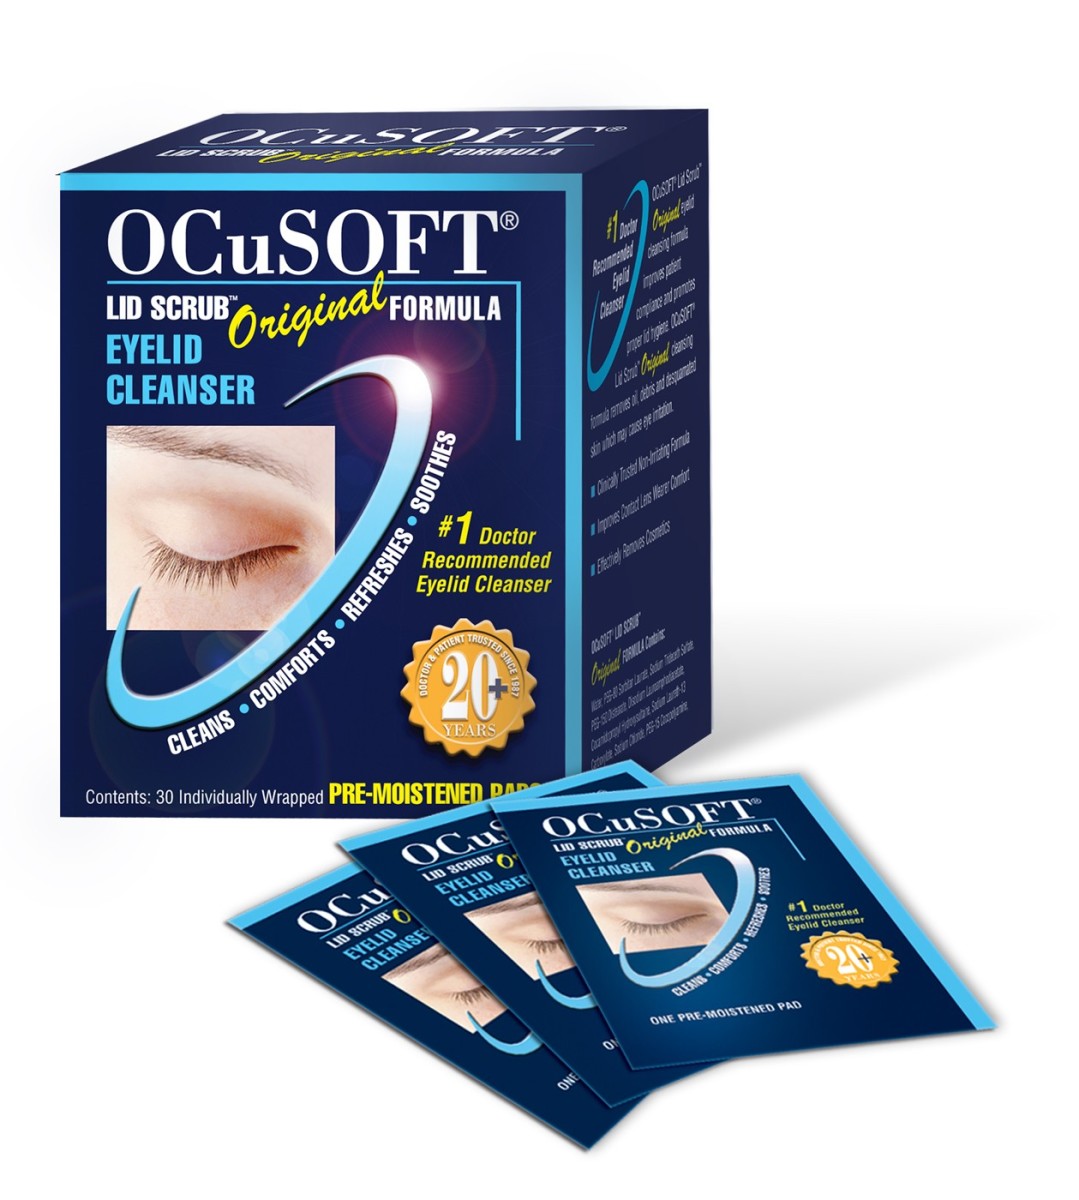 Ocusoft makes an excellent medicated pad for scrubbing the lids. They're easy to use as well, just wet and scrub!